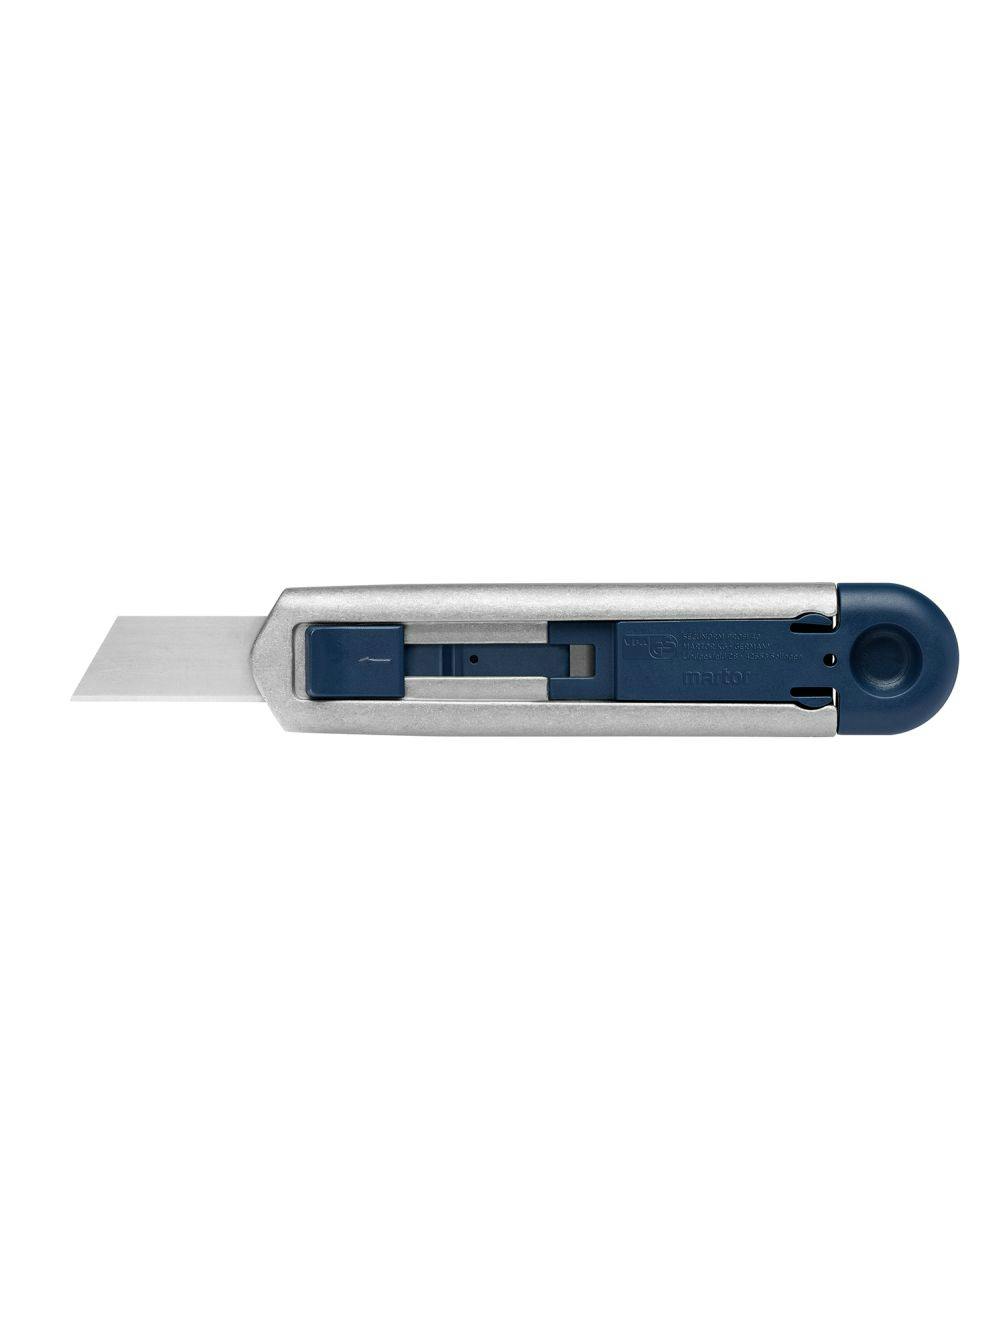 Martor Secunorm Profi40 MDP With Blade No. 17940.Stainless, Metal Detectable (Single Unit)